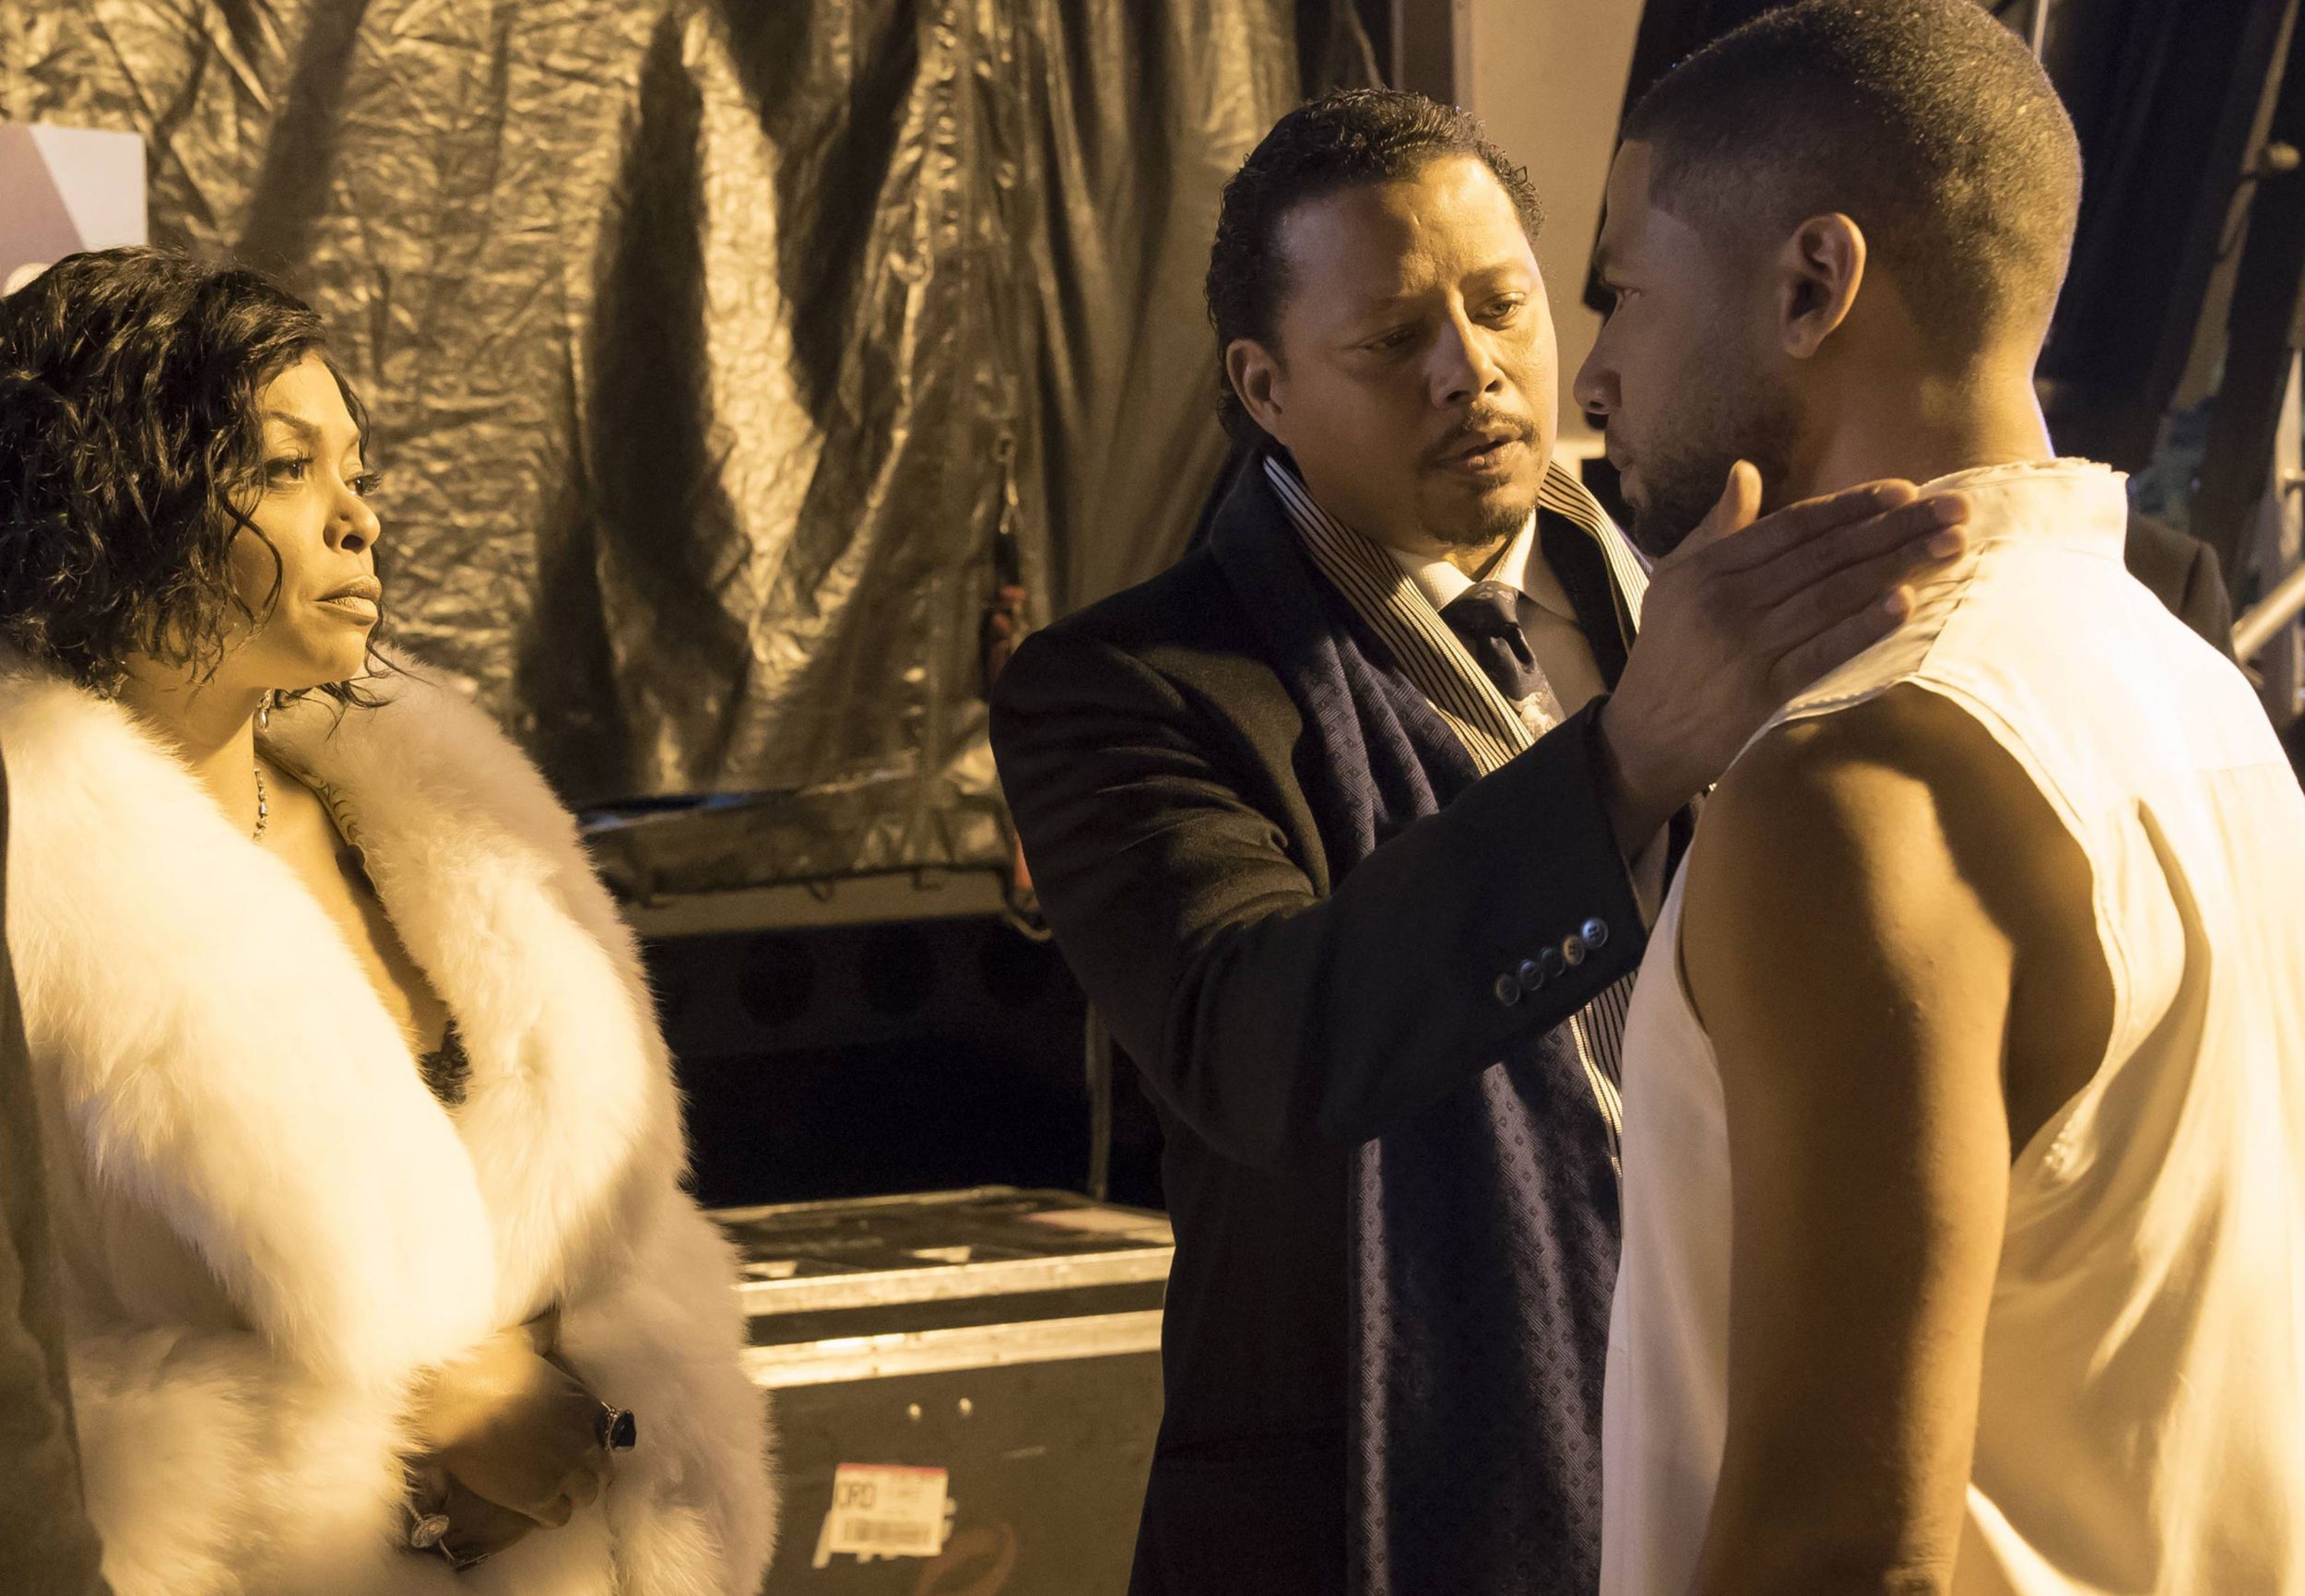 EMPIRE: Pictured L-R: Taraji P. Henson, Terrence Howard and Jussie Smollett in the "A Furnace For your Foe" fall  finale episode of EMPIRE airing Dec. 14 (8:00-9:00 PM ET/PT) on FOX. ©2016 Fox Broadcasting Co. CR: Chuck Hodes/FOX